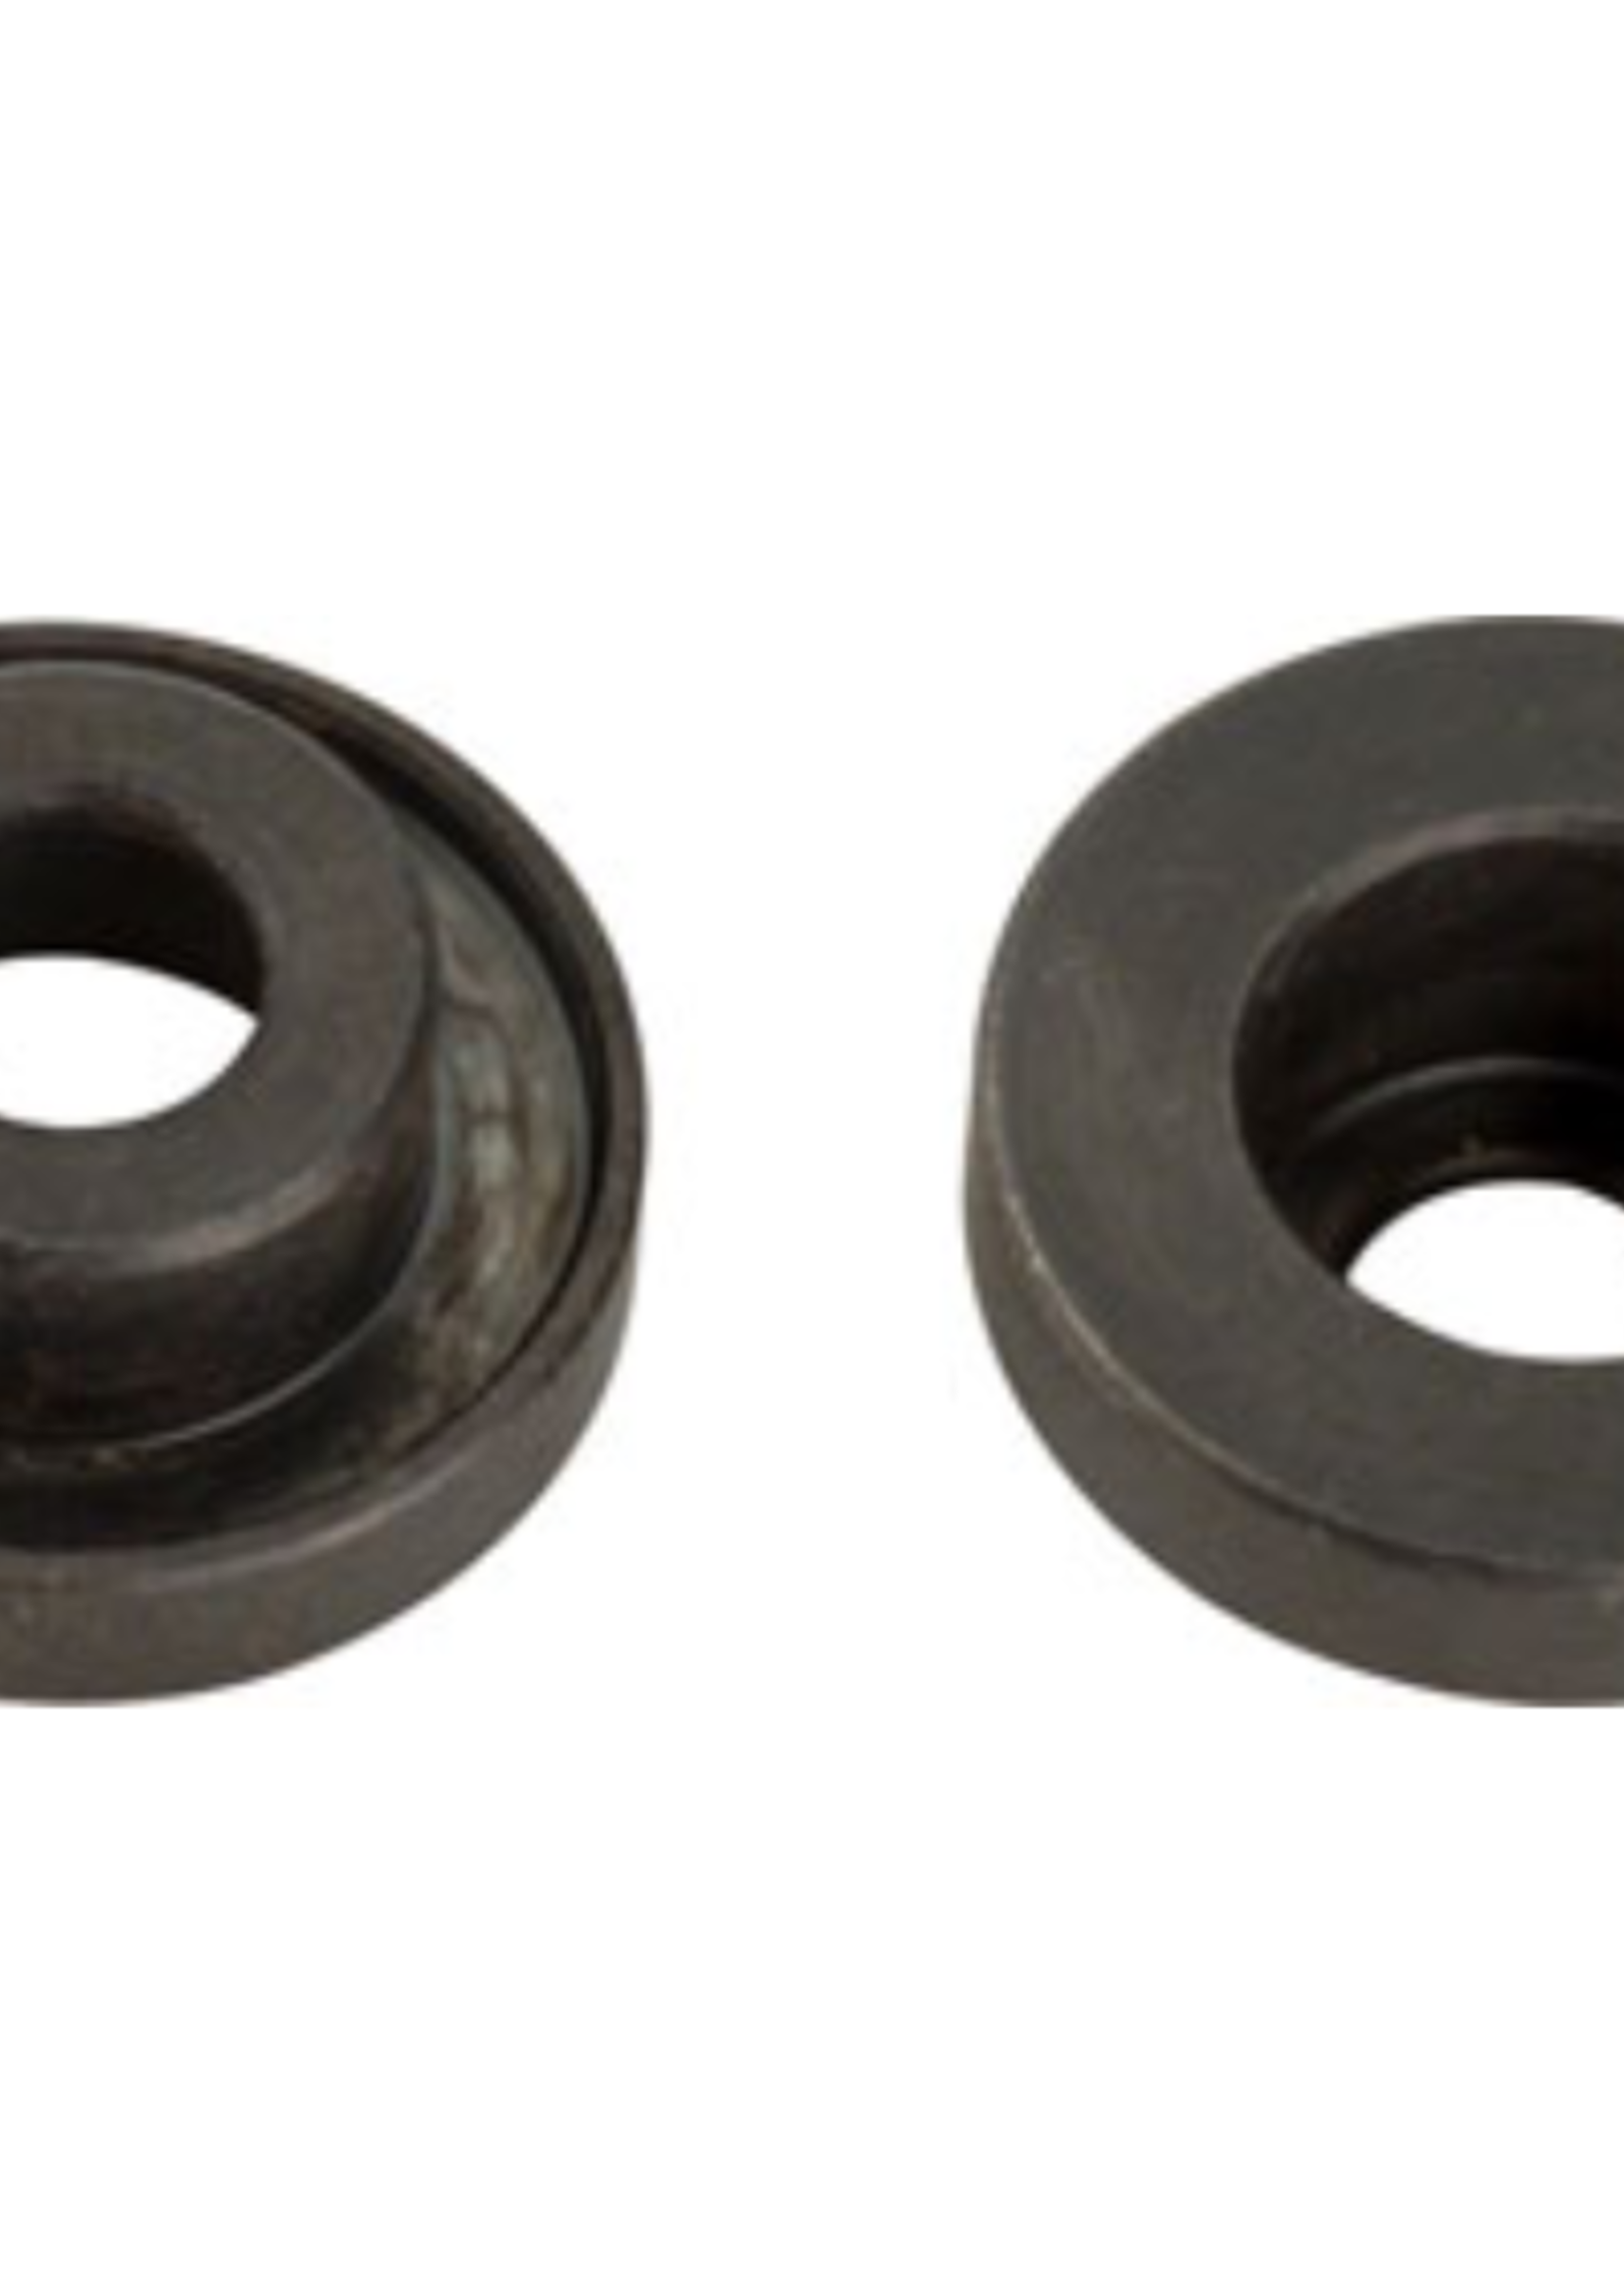 SURLY Surly 10/12/ Adaptor Washer for QR Hubs